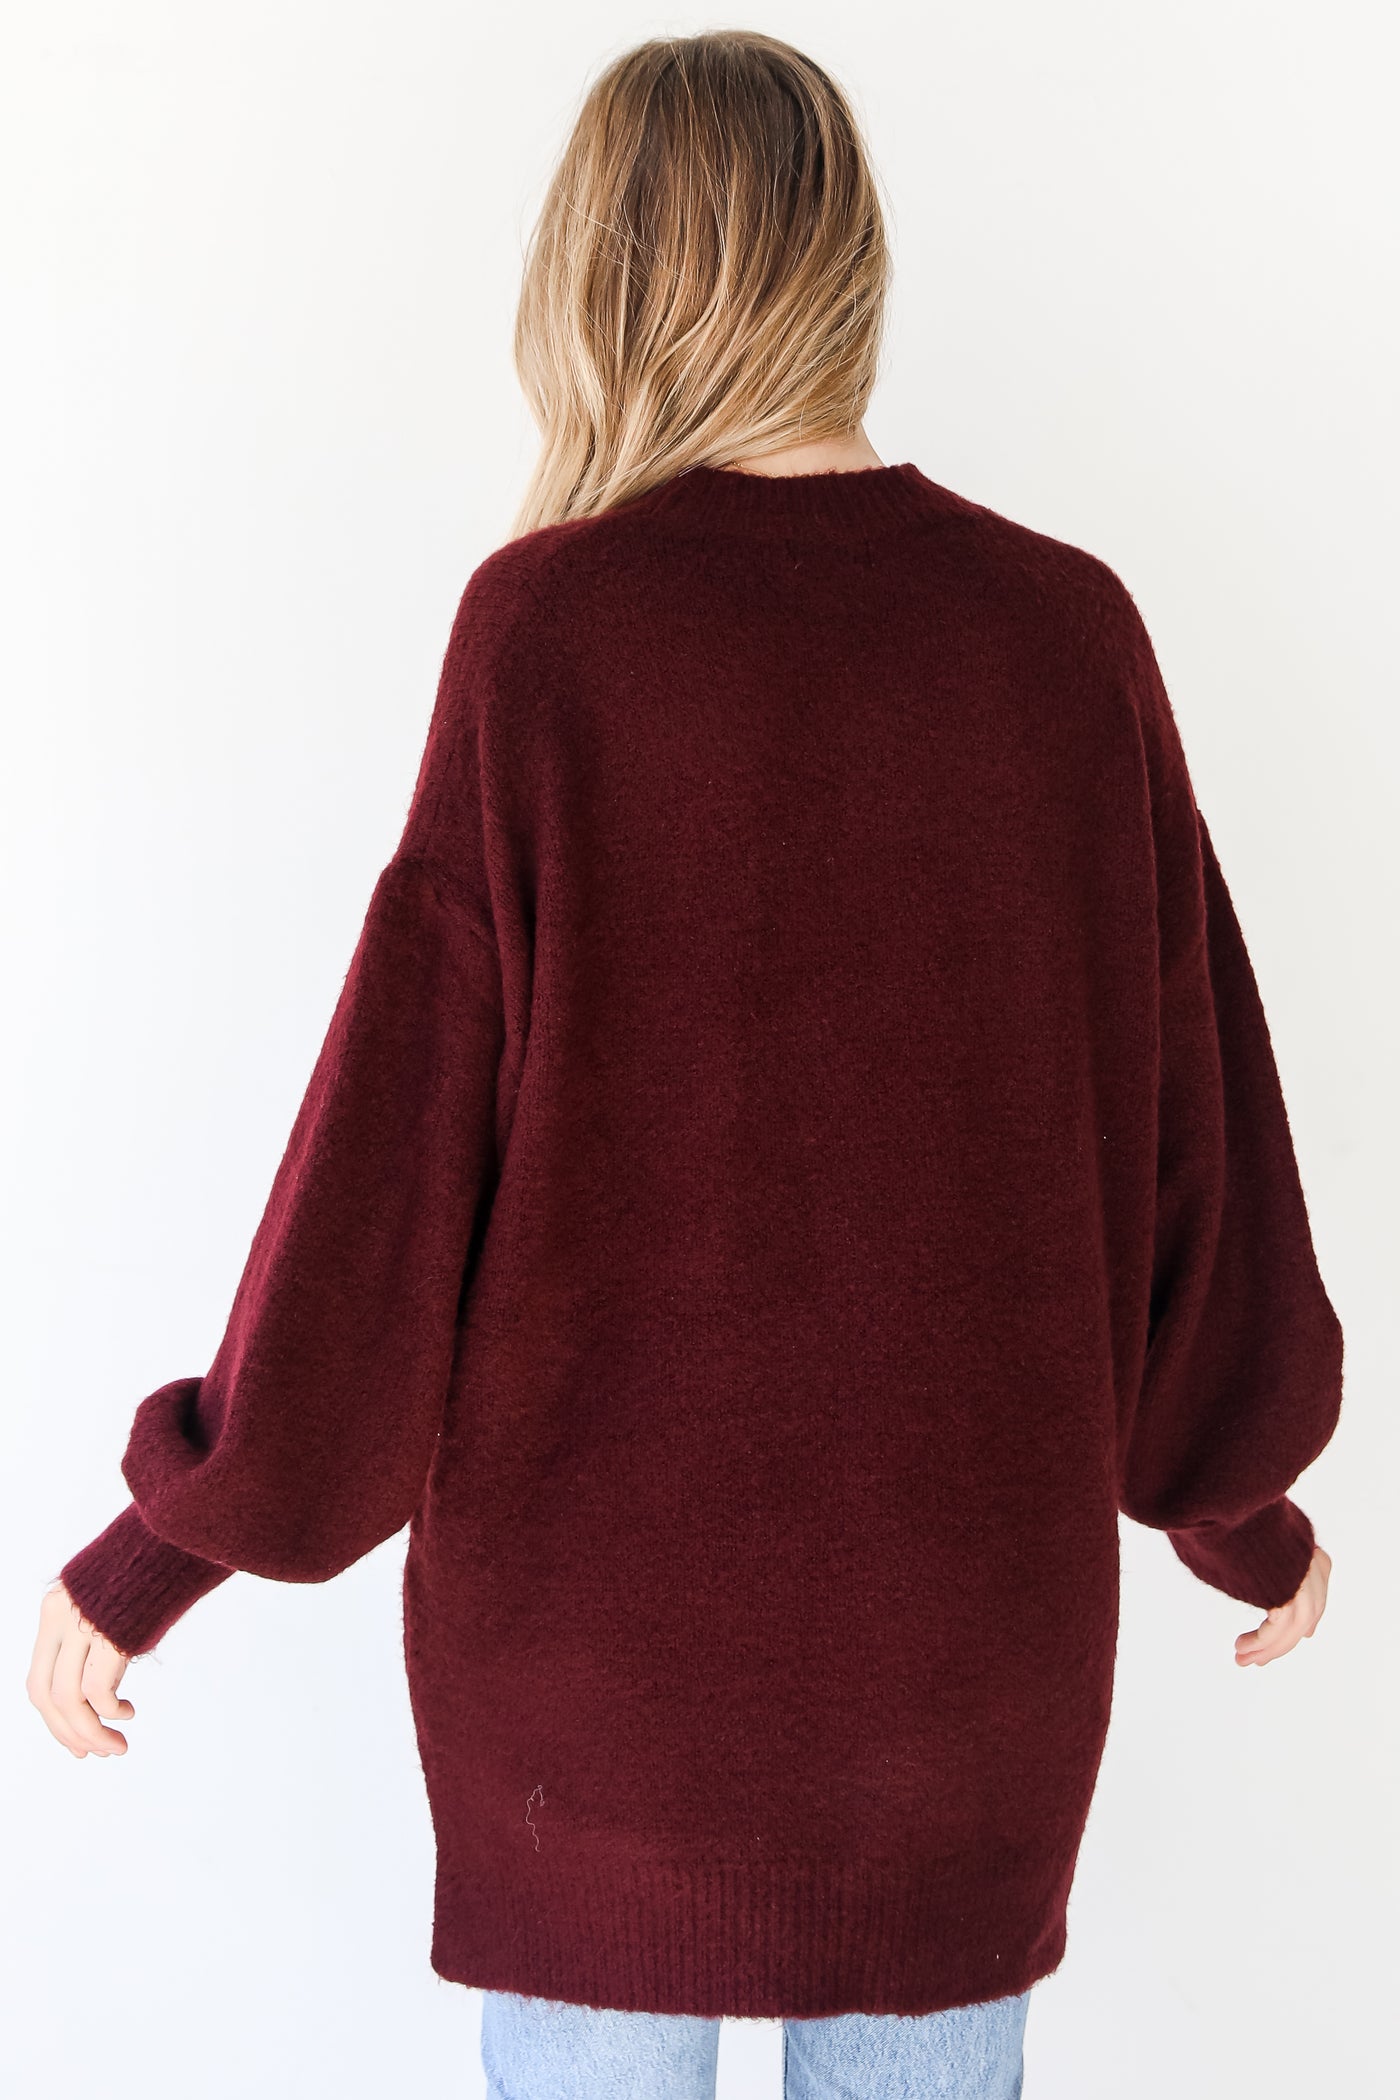 burgundy Oversized Sweater back view